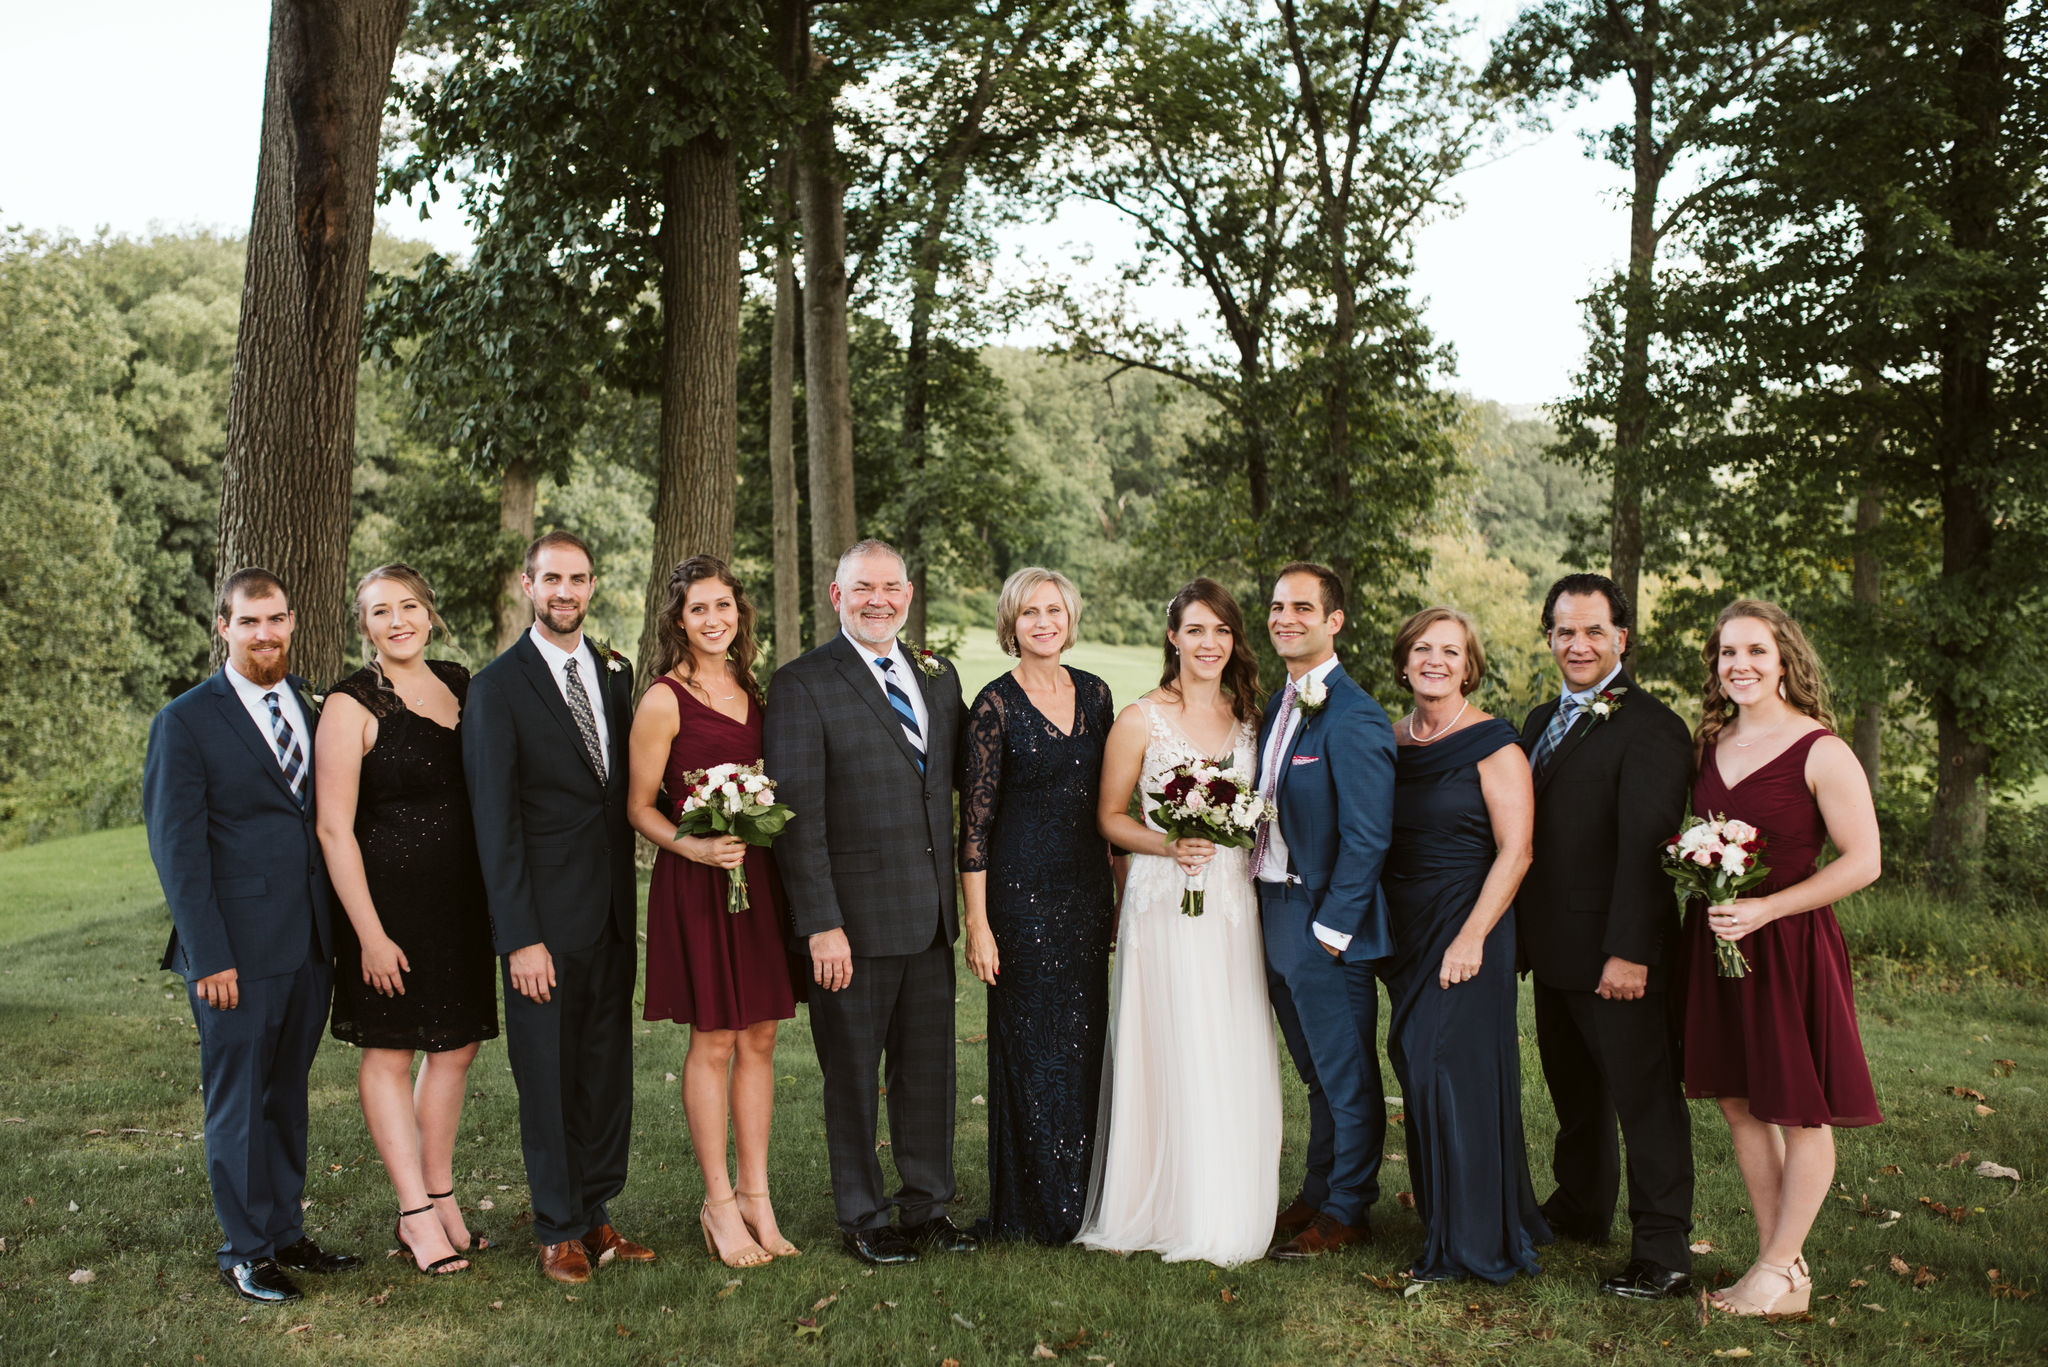  Phoenix Maryland, Baltimore Wedding Photographer, Eagle’s Nest Country Club, Classic, Romantic, Portrait of Bride and Groom with Family Outside 